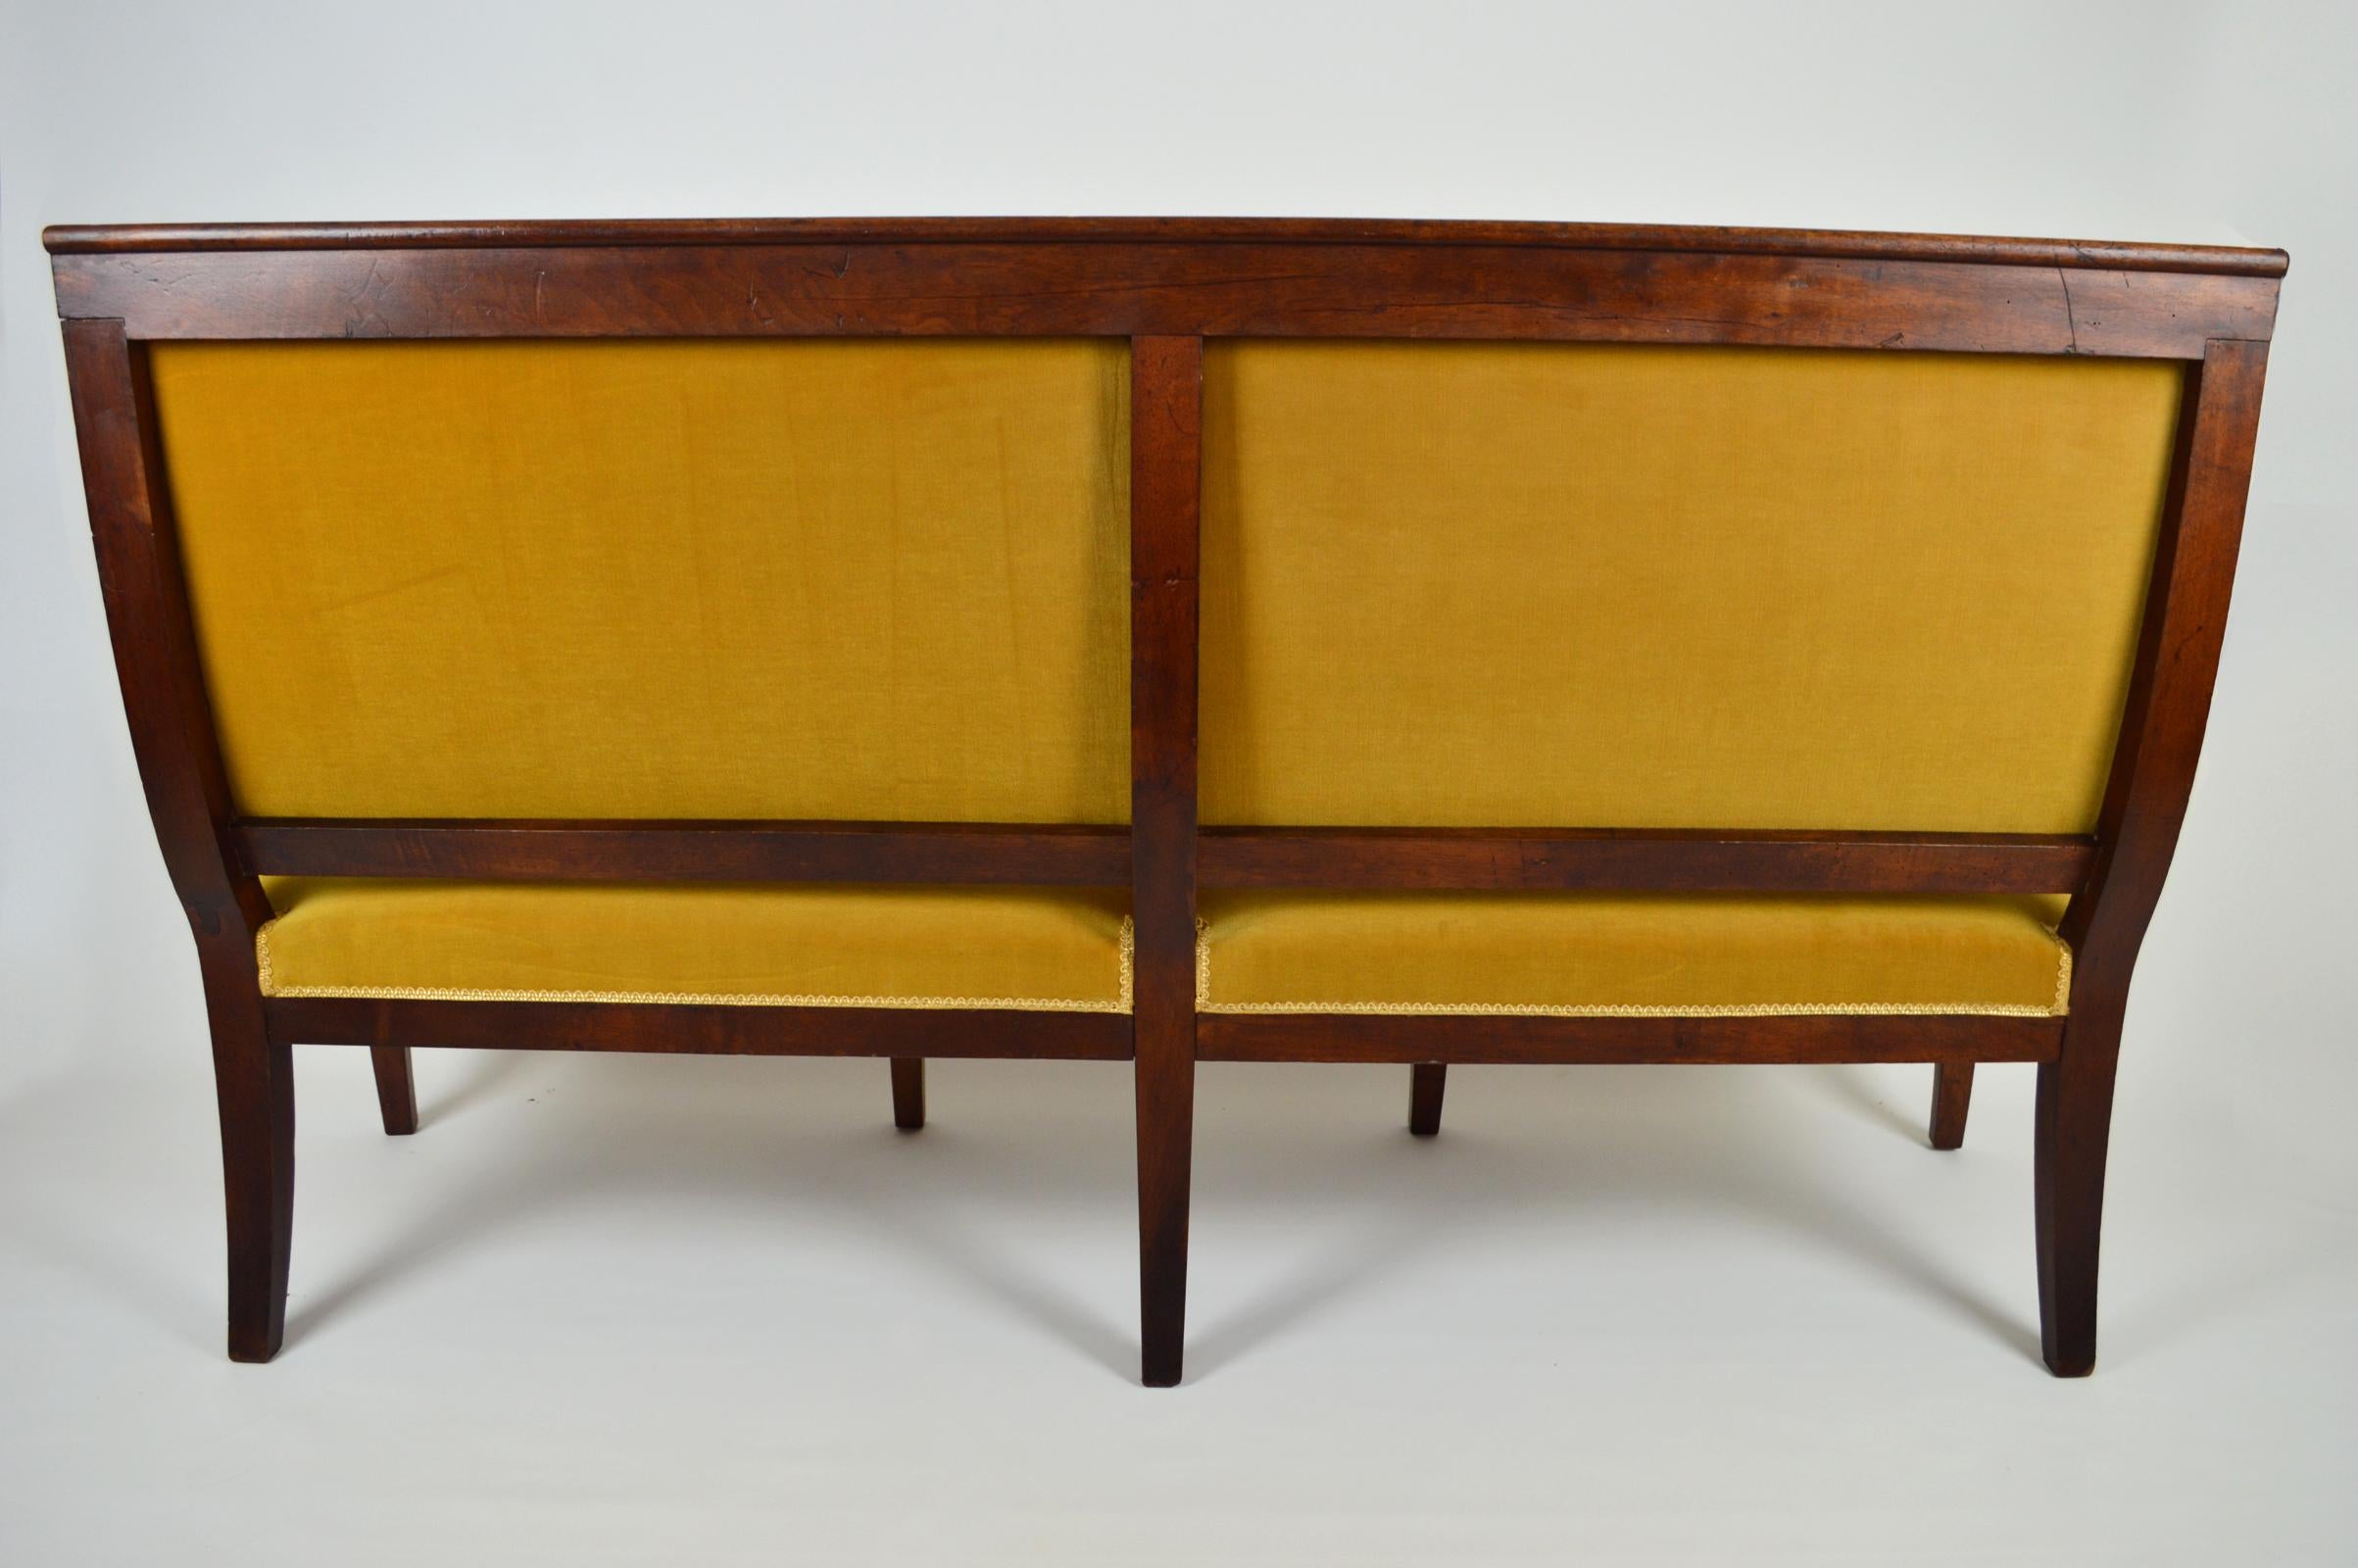 Sofa / Canapé/ Bench in Carved Mahogany, French Restauration, Early 19th Century 11